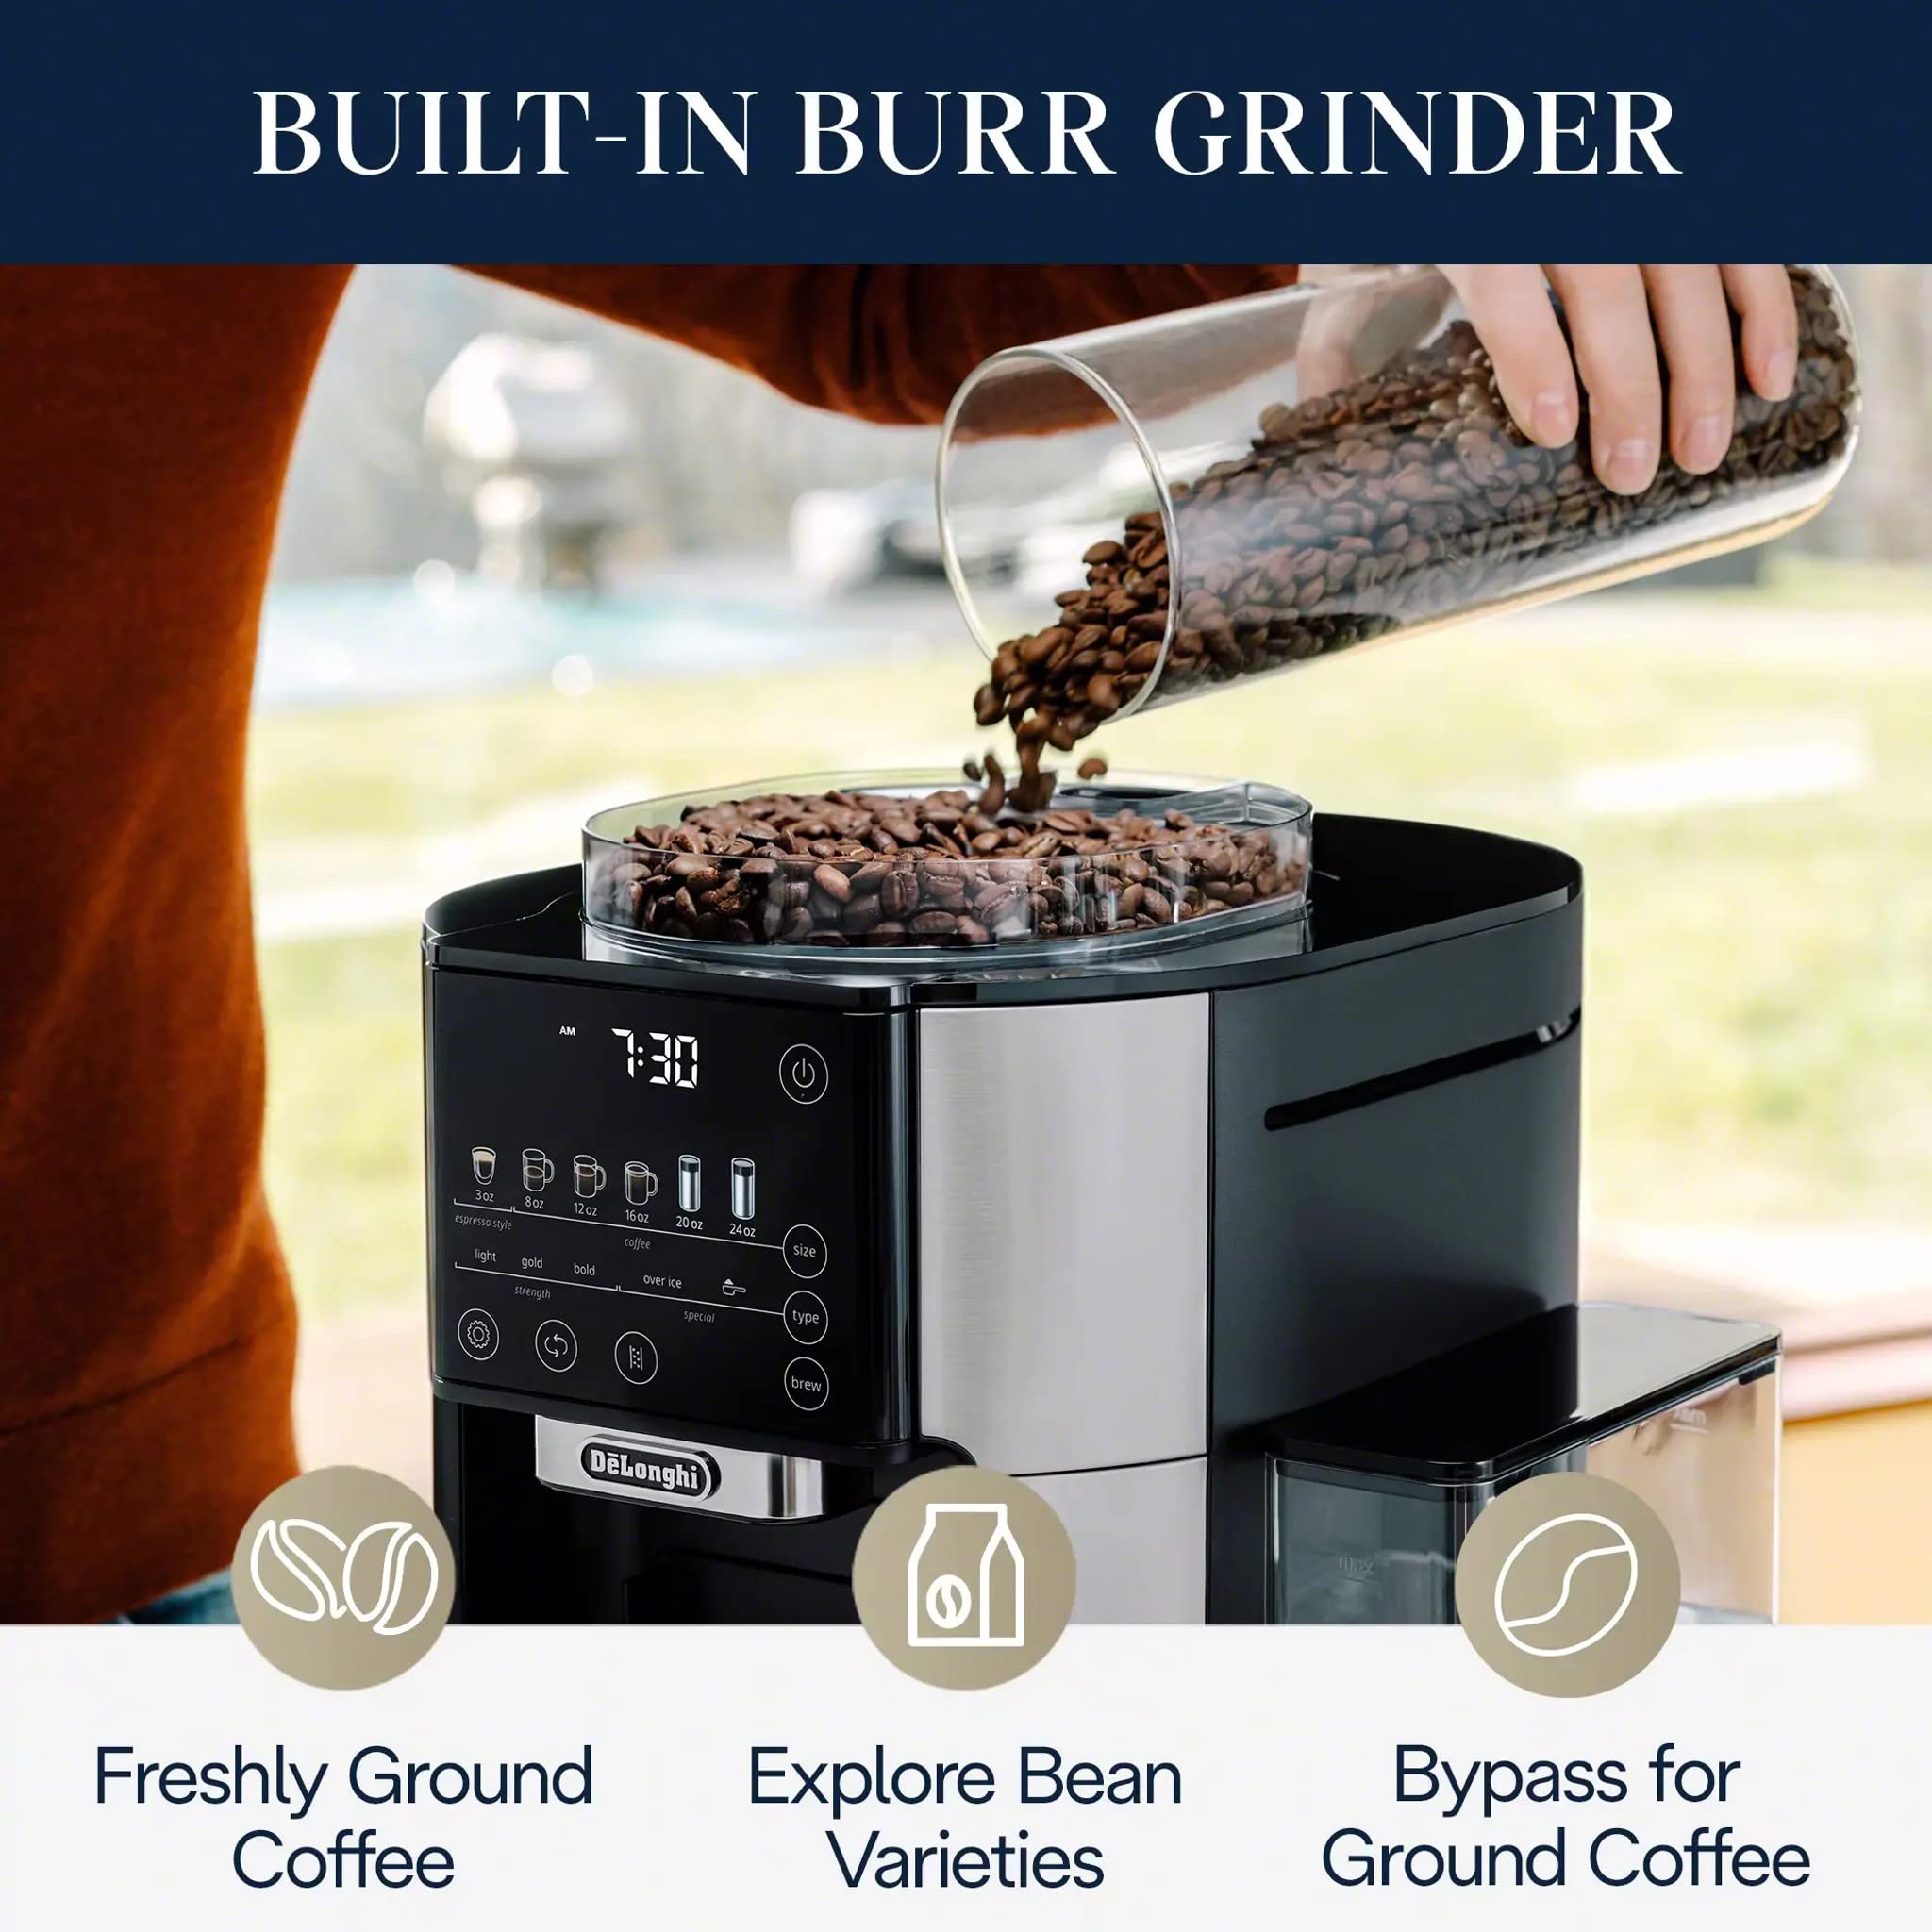 De'Longhi TrueBrew Drip Coffee Maker, Built in Grinder, Single Serve, 8 oz to 24 oz, Hot or Iced Coffee, Stainless, CAM51025MB